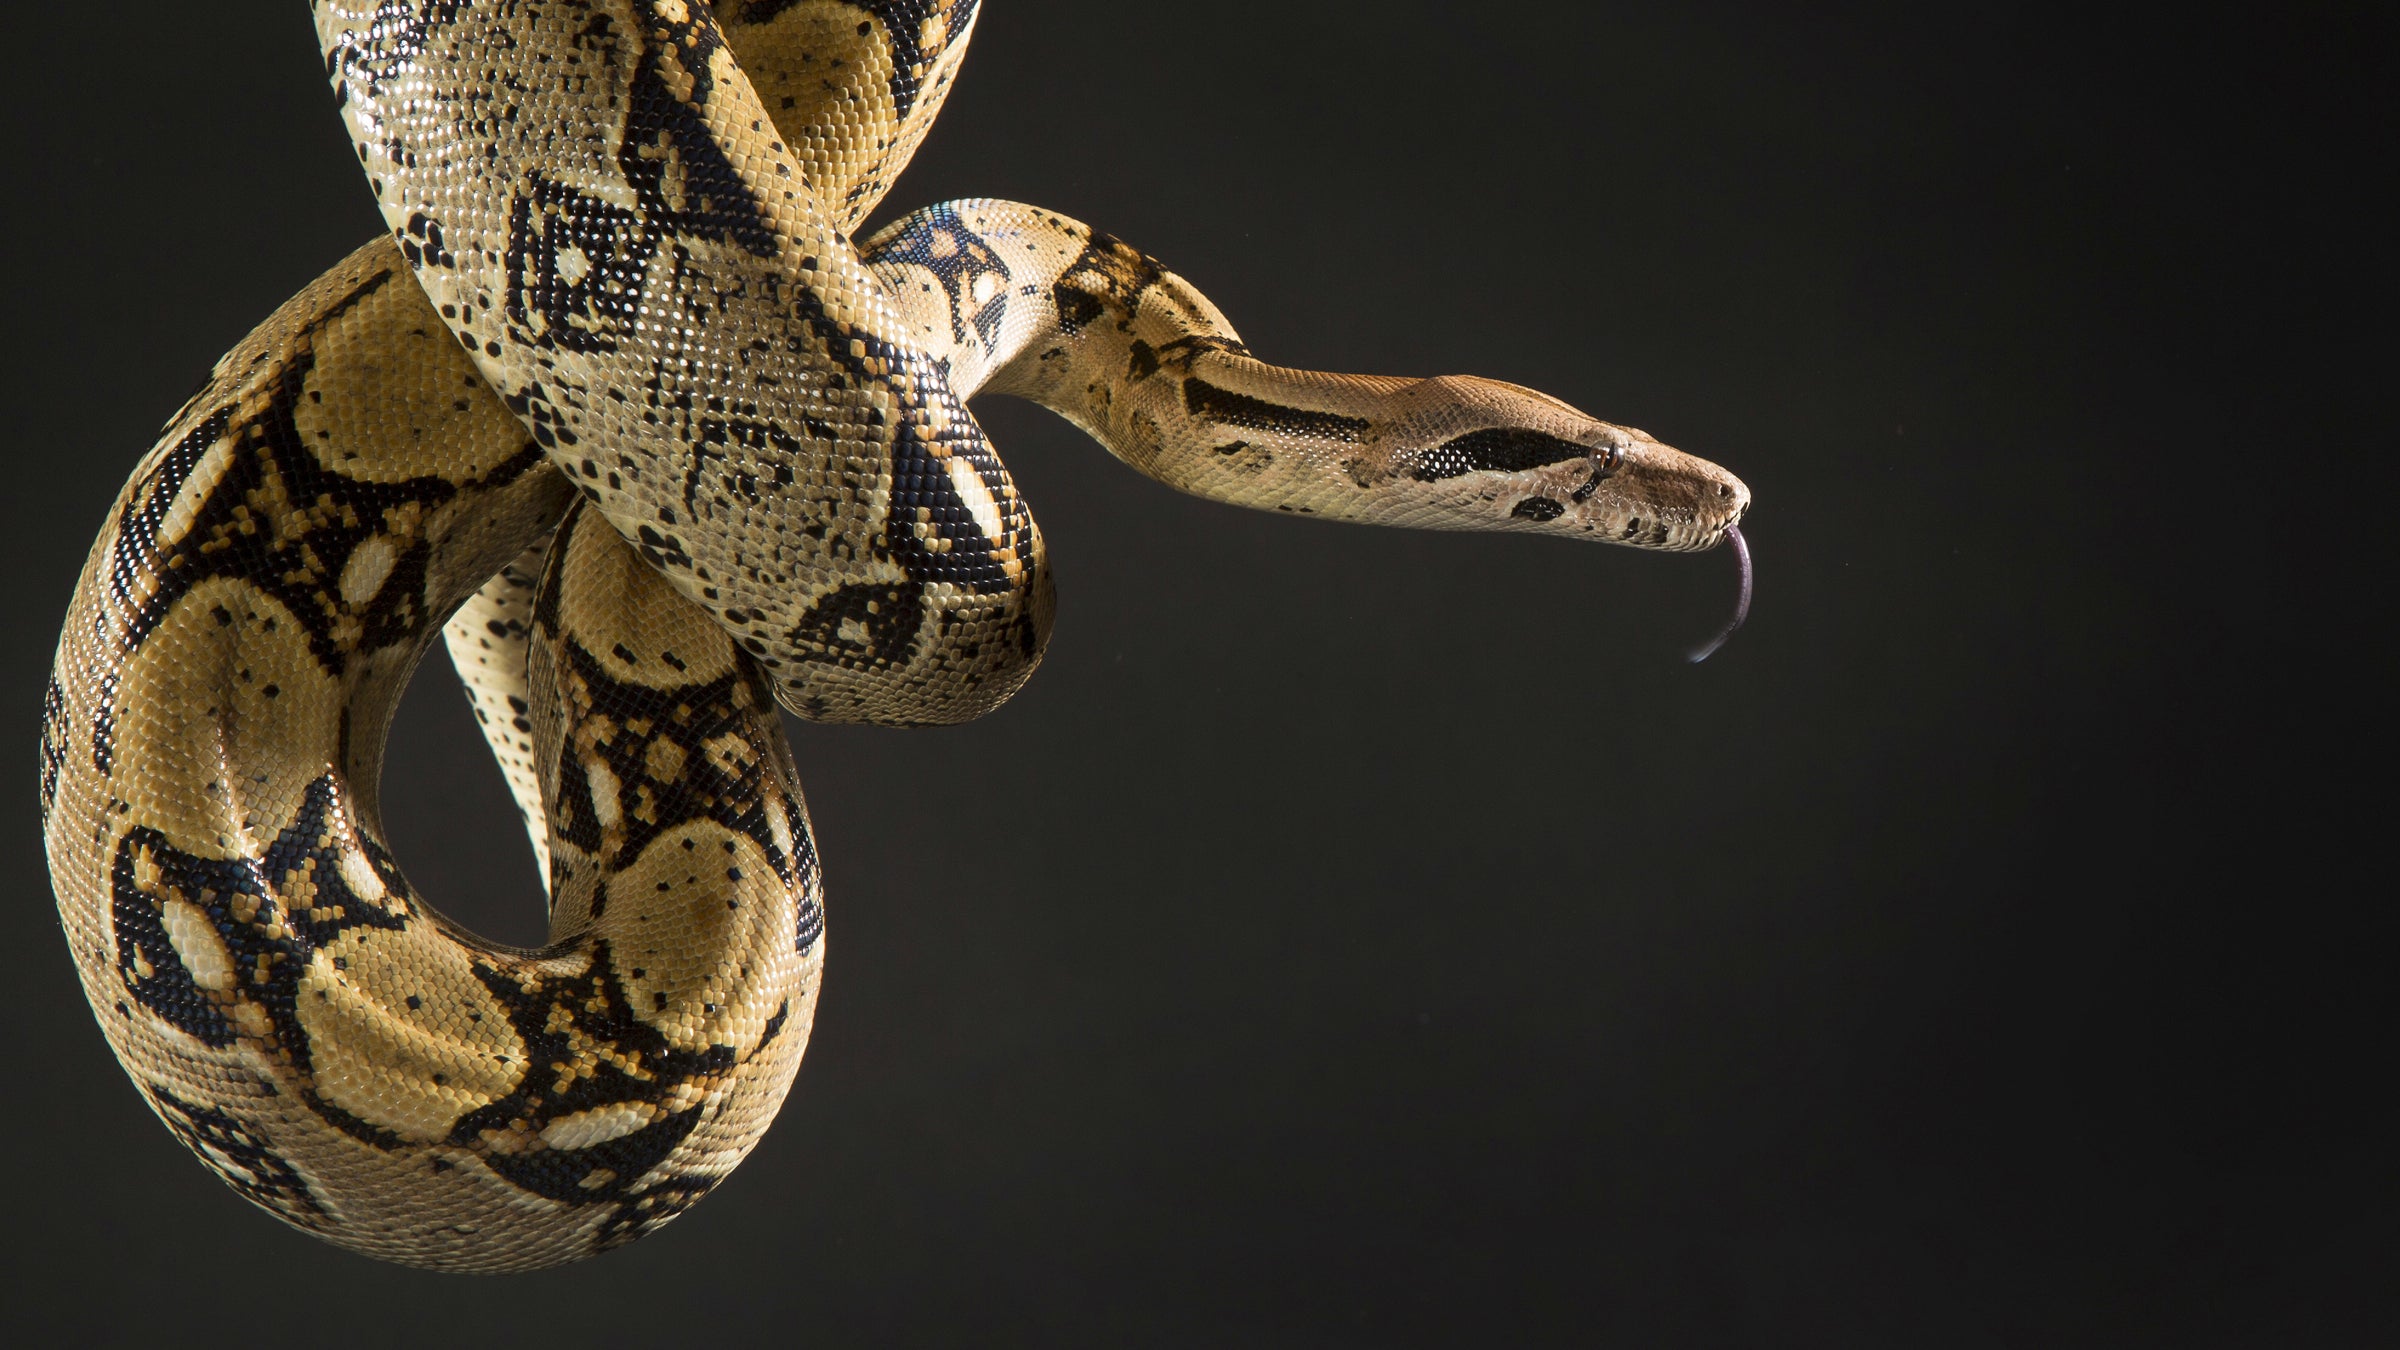  A boa constrictor similar to the snake that boarded a SEPTA bus Sunday. (<a href=